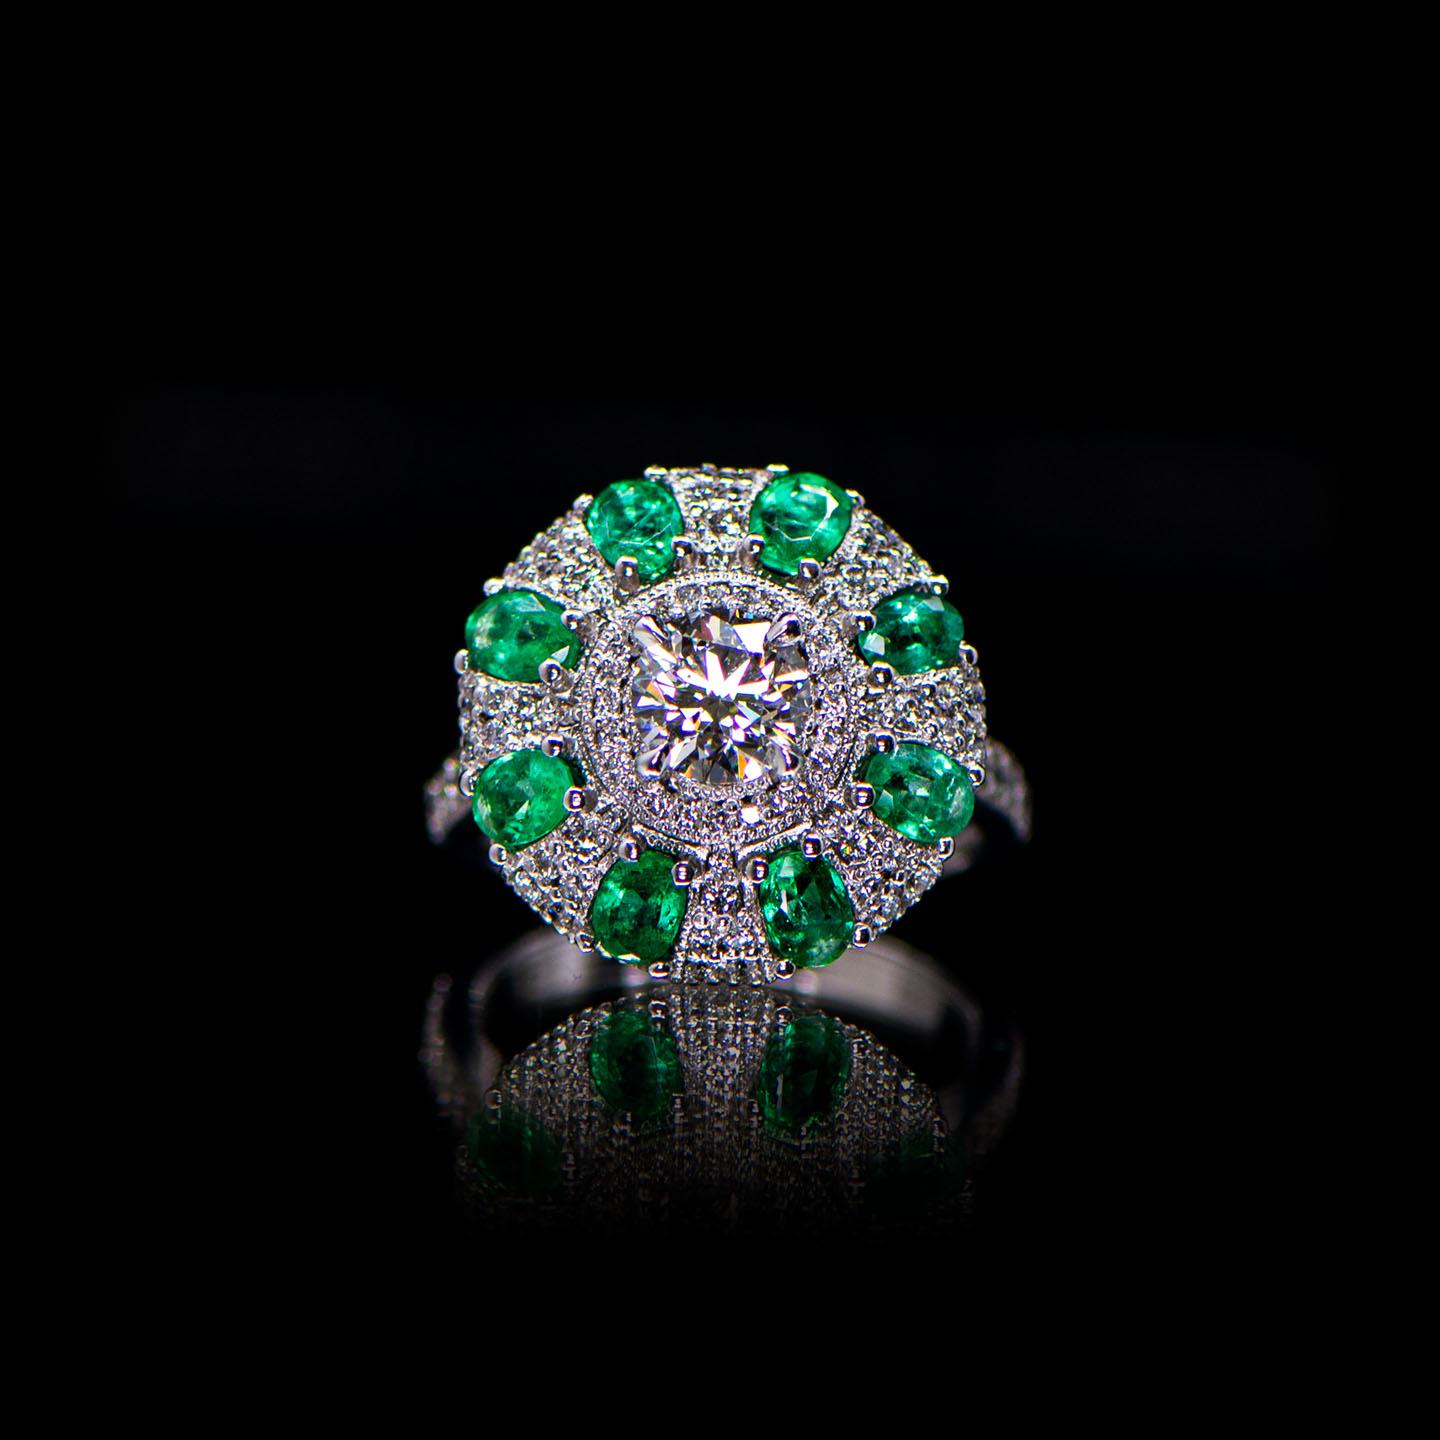 This eternally glamorous, ready-to-wear French Art Deco style ring features eight luminous oval cut emeralds radiating from a dazzling central diamond. Each stone is nestled in an exquisitely handcrafted pavé diamond milgrain cluster setting,